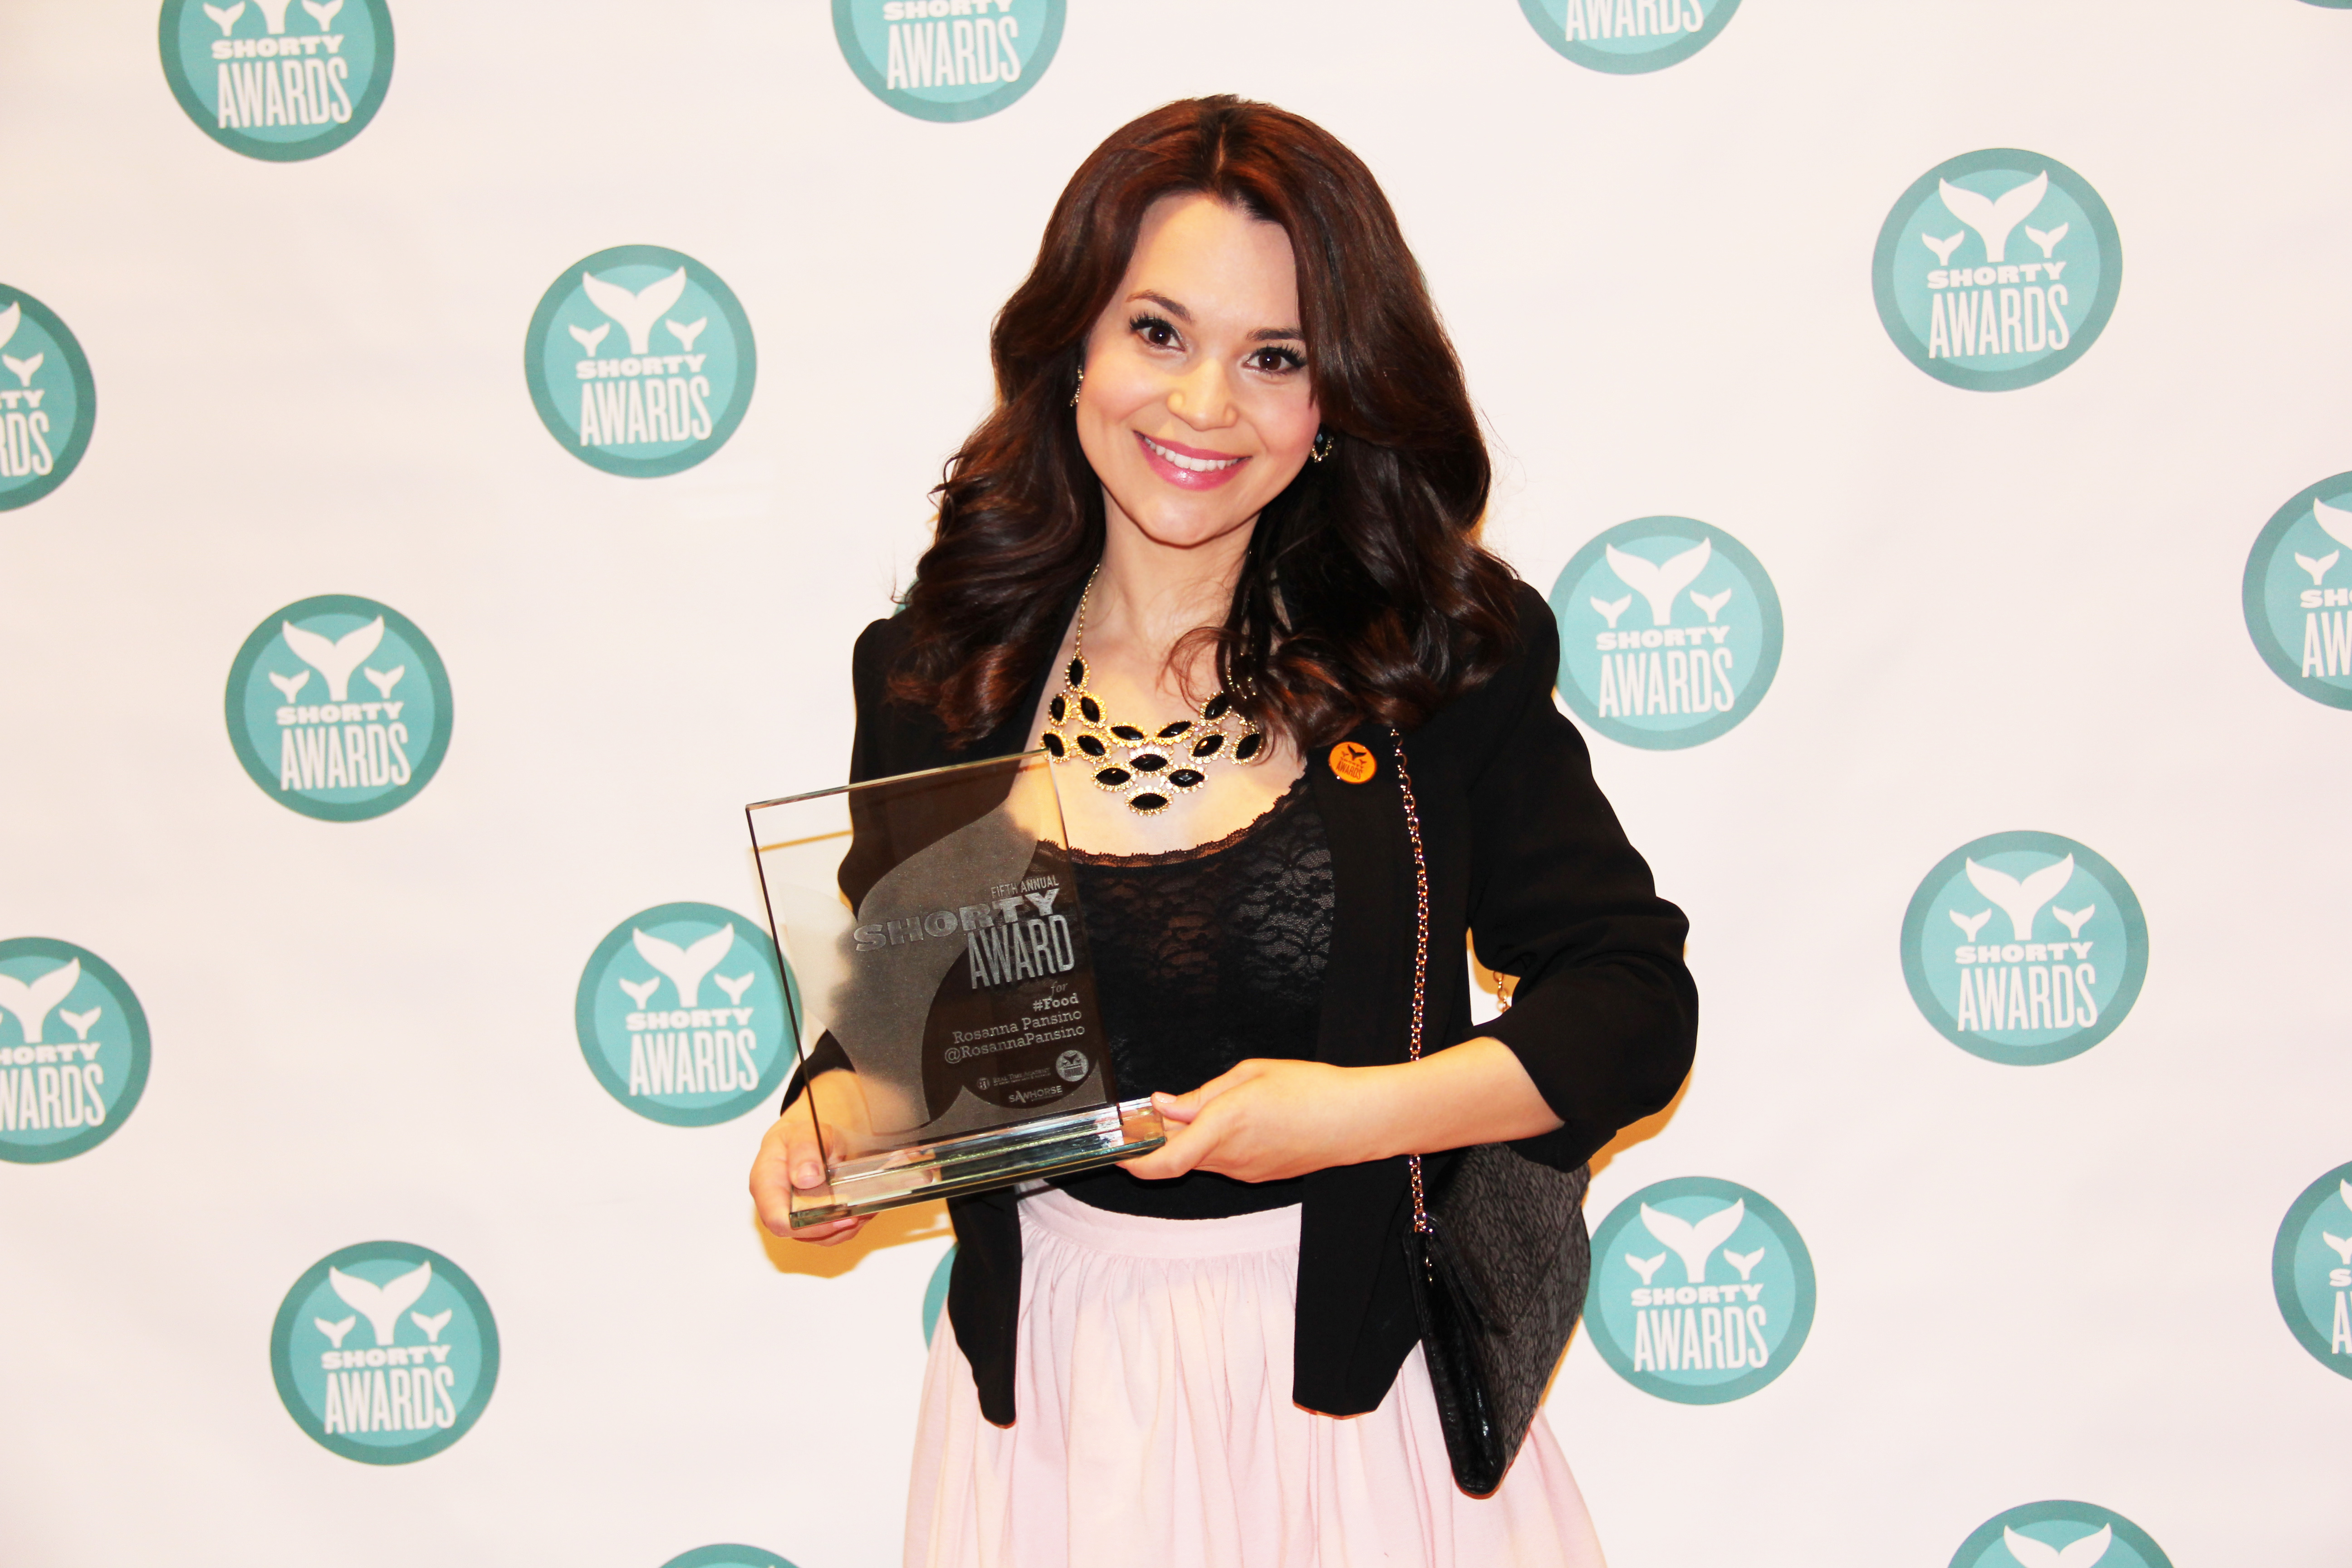 Rosanna Pansino attending the Shorty Awards at the TimesCenter on April,8 2013 in New York, NY.